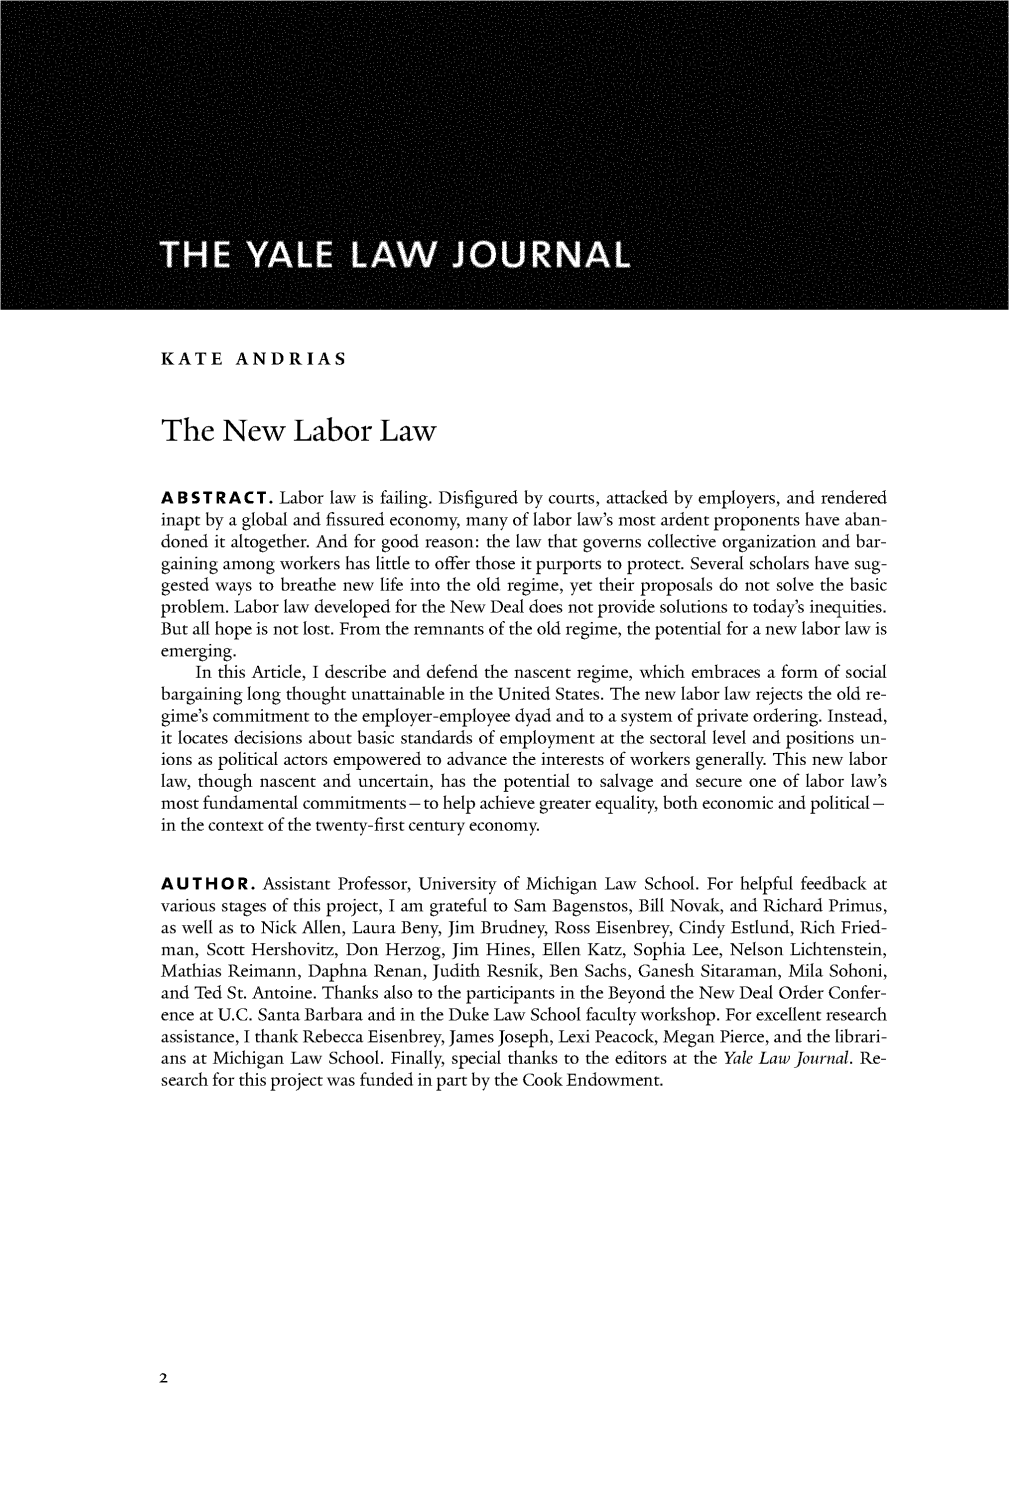 The New Labor Law